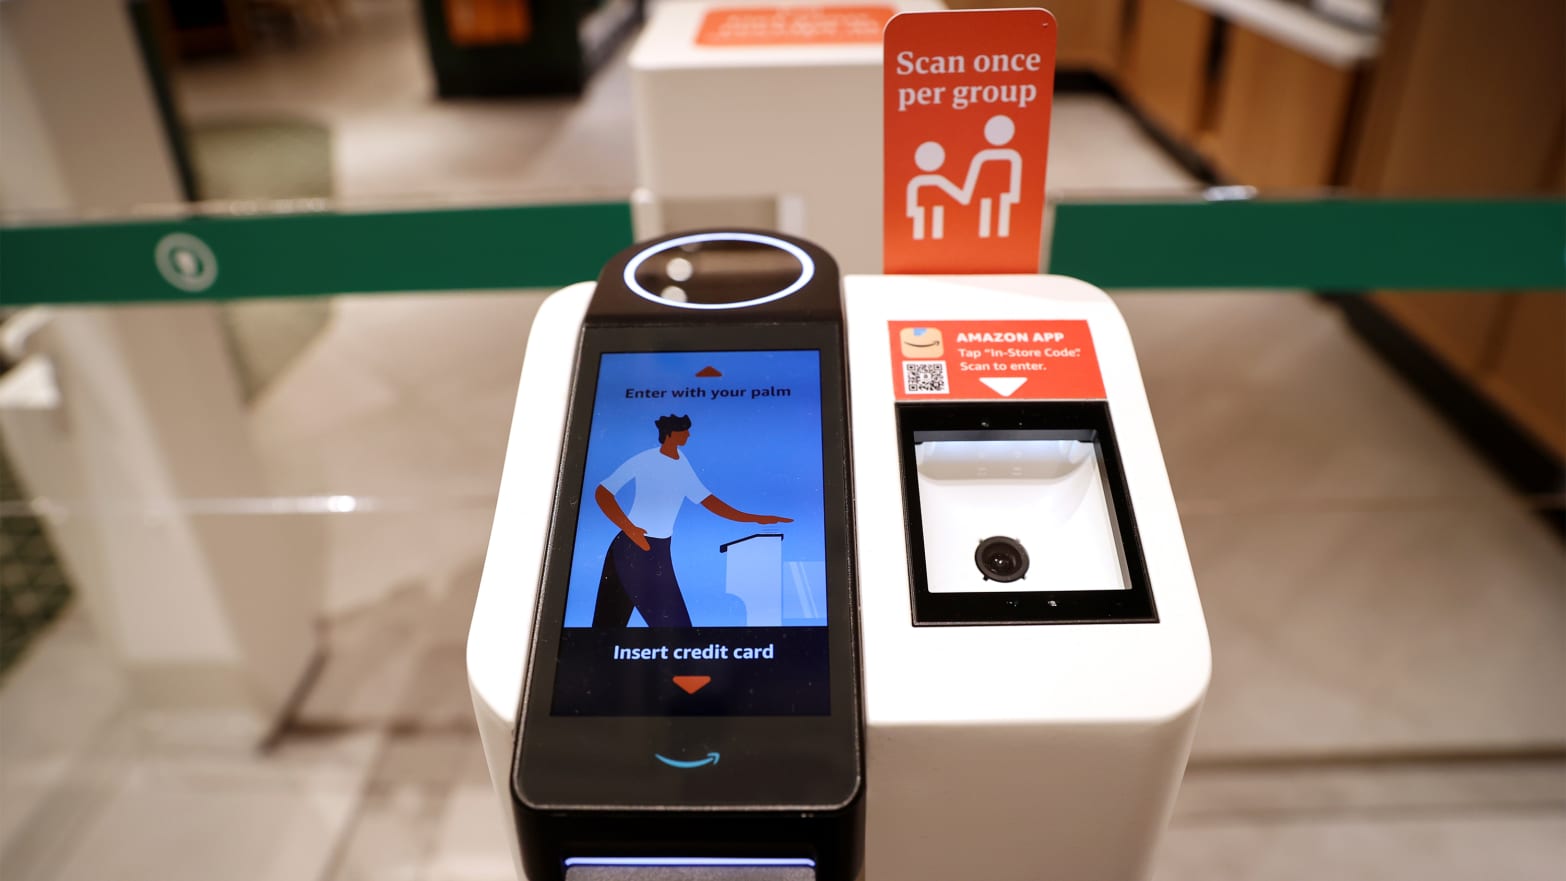 A scanner at an entrance turnstile of a new Starbucks store partnered with Amazon Go.